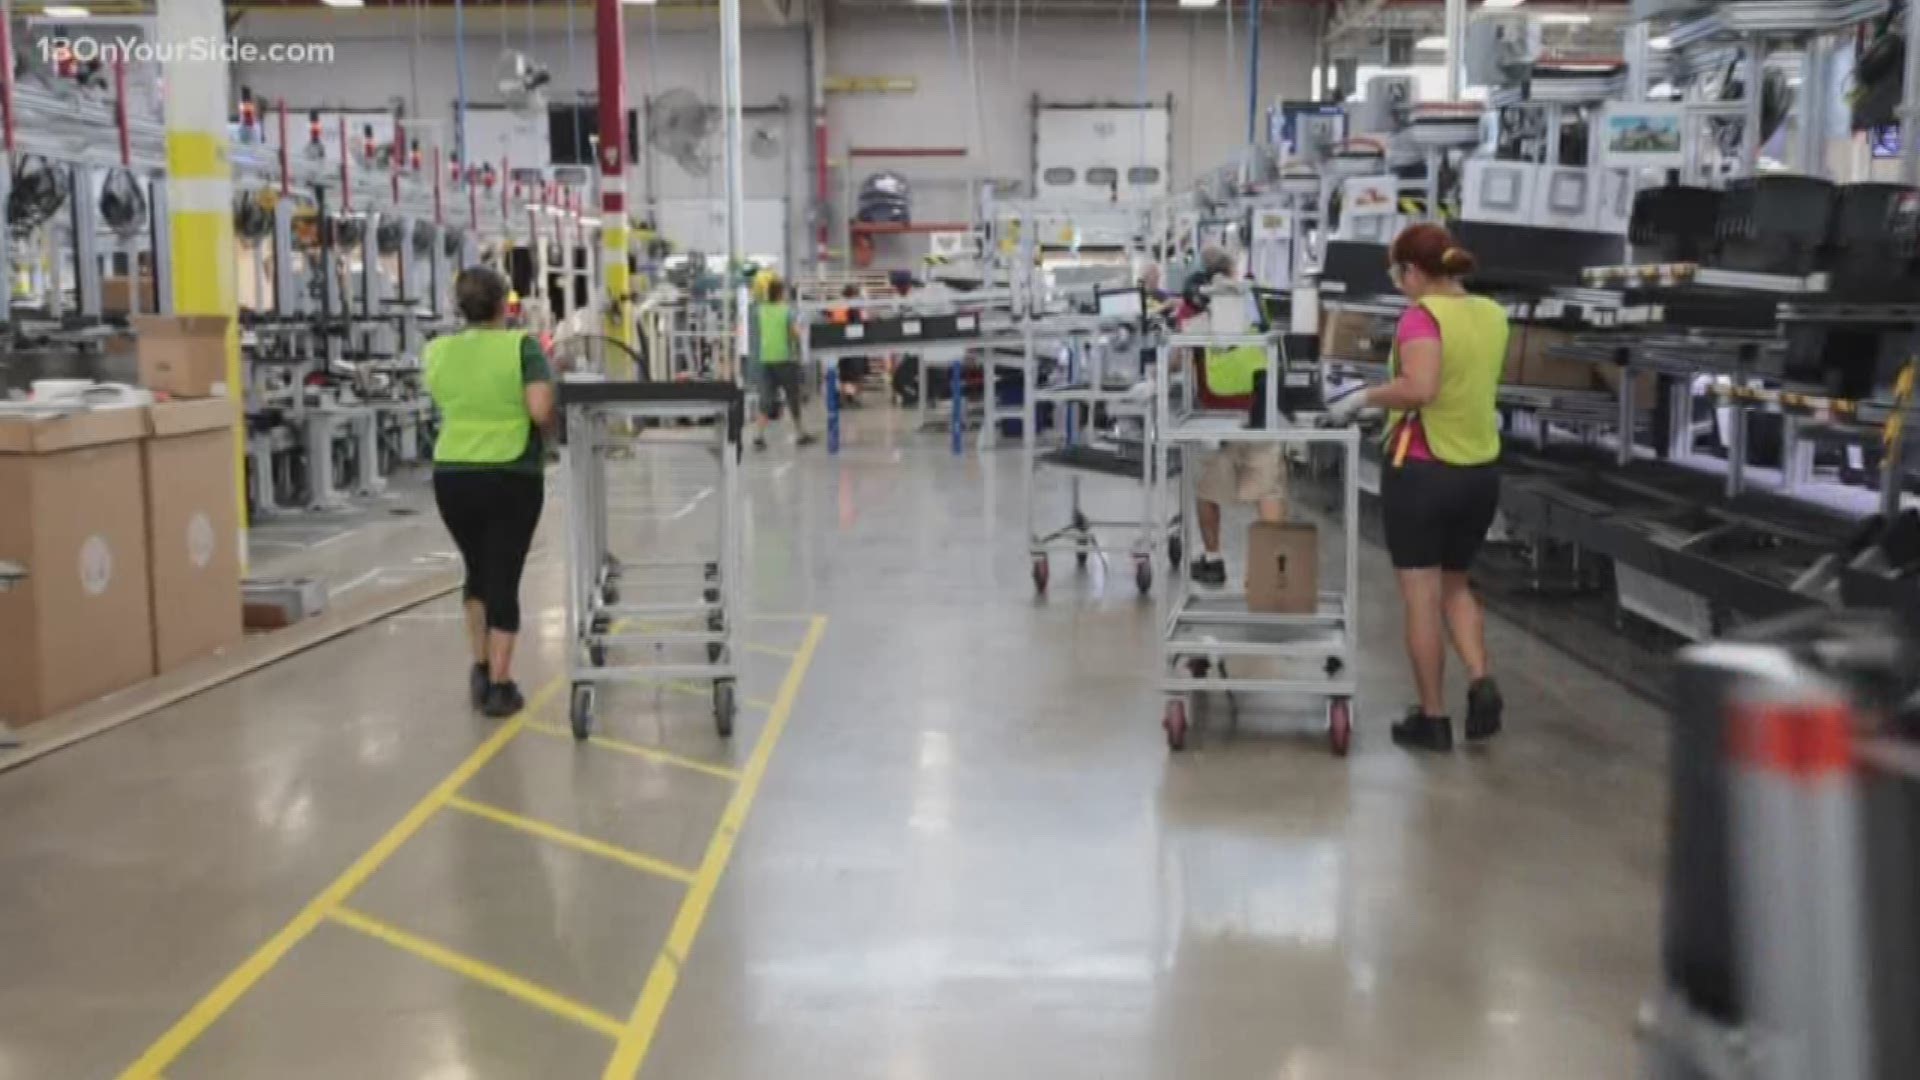 Herman Miller manufactures more than just office furniture. We sat down with two Herman Miller employees to learn why the company is a great place to work.